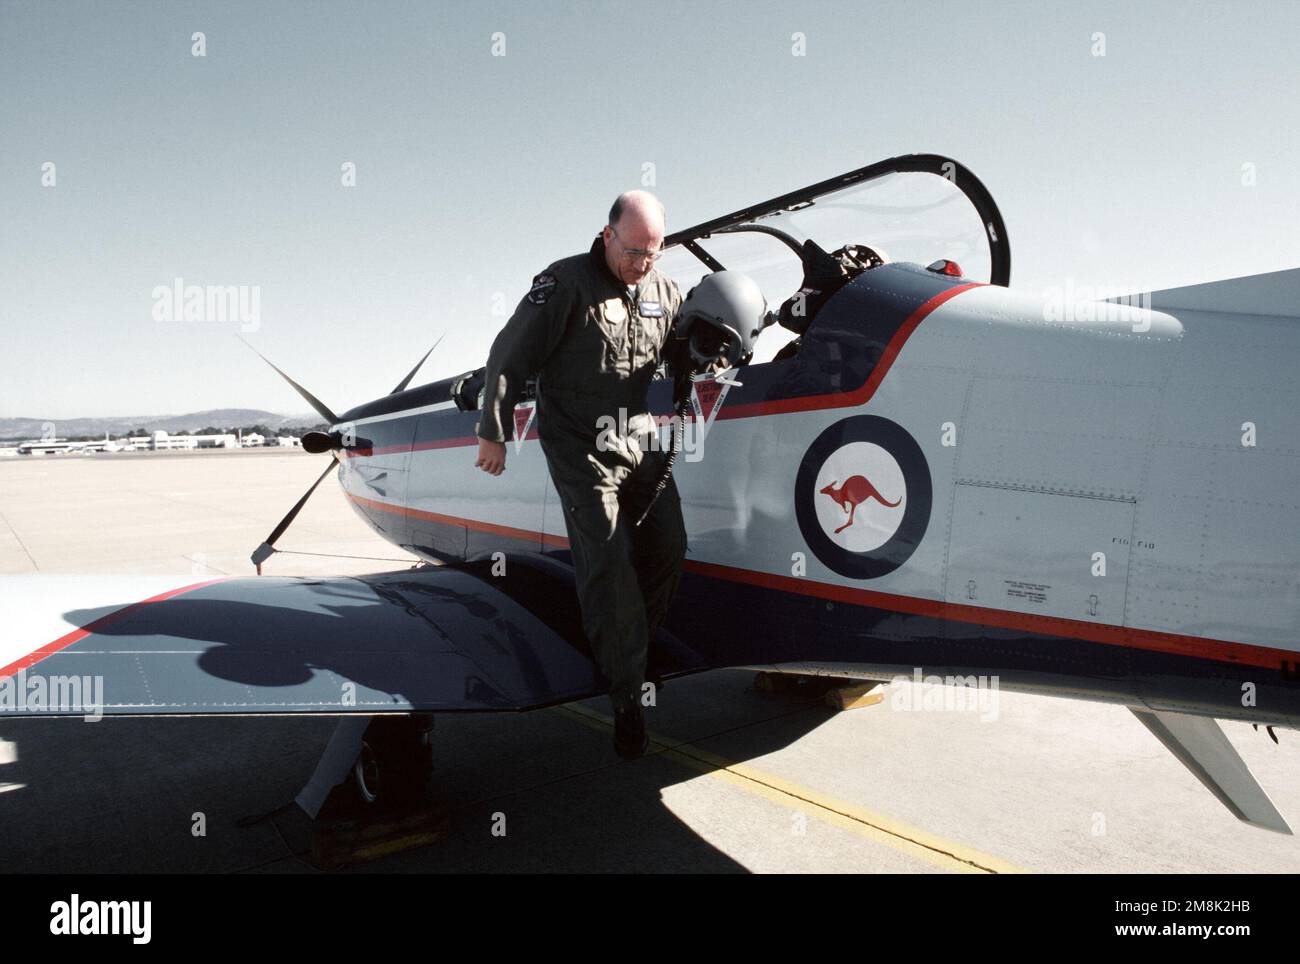 USAF Major (Dr.) Emmet Murphy, a flight surgeon on an exchange assignment in Canberra, Australia steps from an airplane, which belongs to the Royal Australian Air Force CHIEF of STAFF. From AIRMAN Magazine's December 1994 issue article 'Foreign Exchange'. Base: Canberra State: New South Wales Country: Australia (AUS) Stock Photo